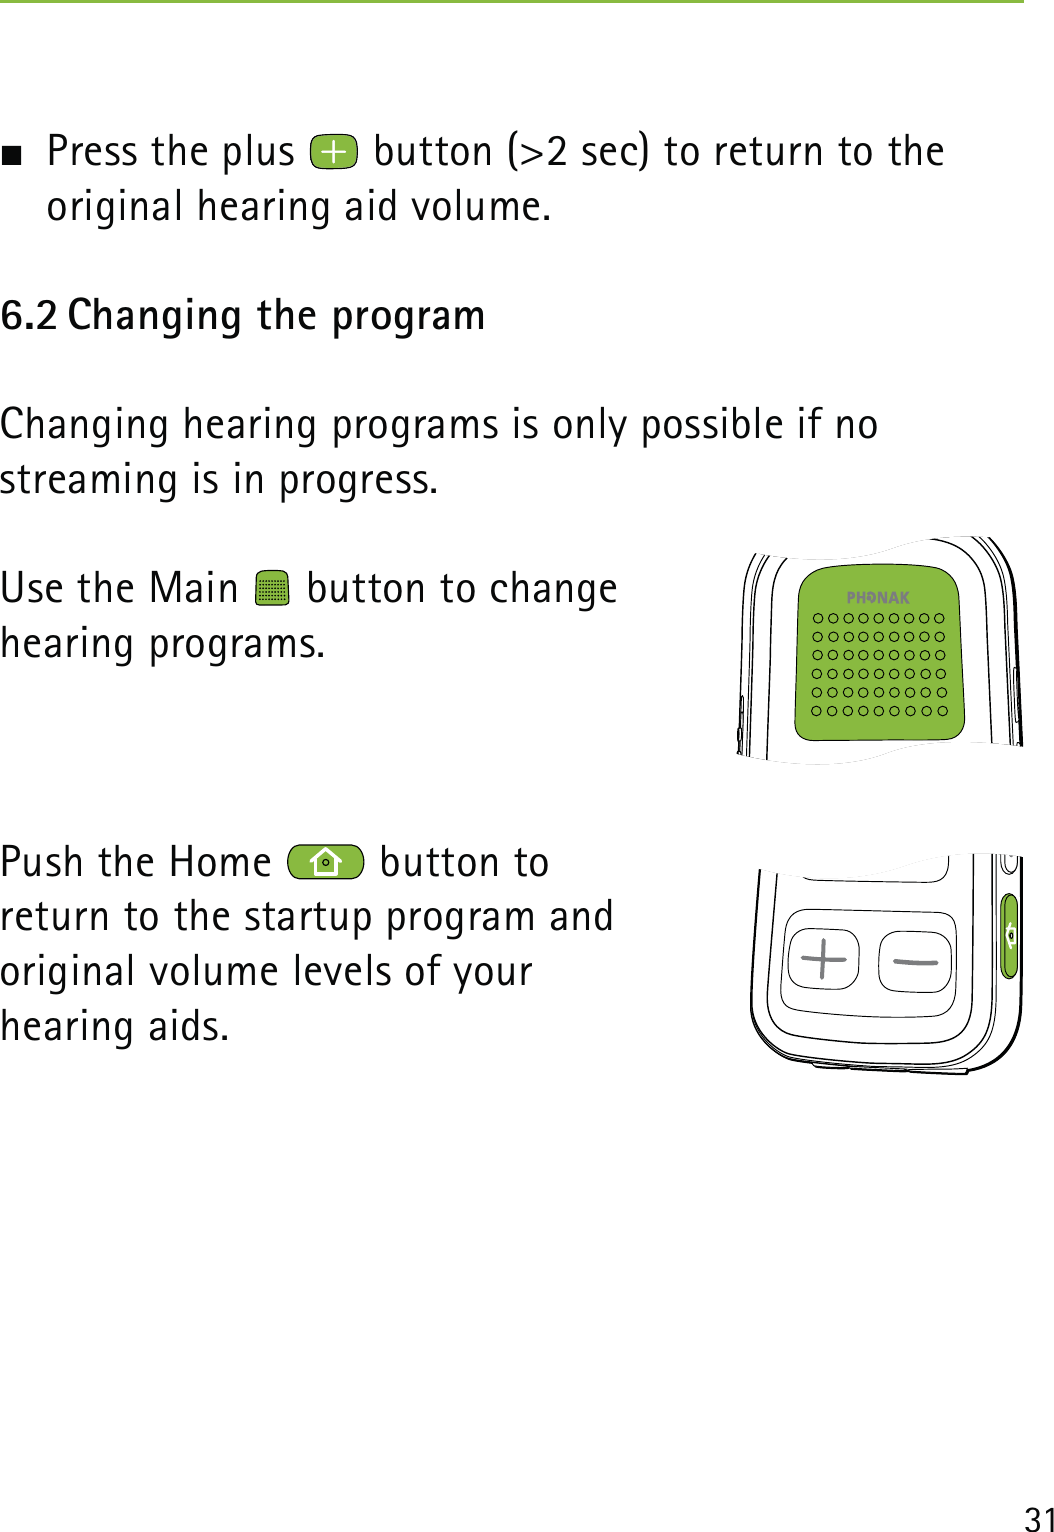 31  Press the plus   button (&gt;2 sec) to return to the  original hearing aid volume.6.2 Changing the programChanging hearing programs is only possible if no  streaming is in progress.Use the Main   button to change  hearing programs. Push the Home   button to  return to the startup program and  original volume levels of your  hearing aids.